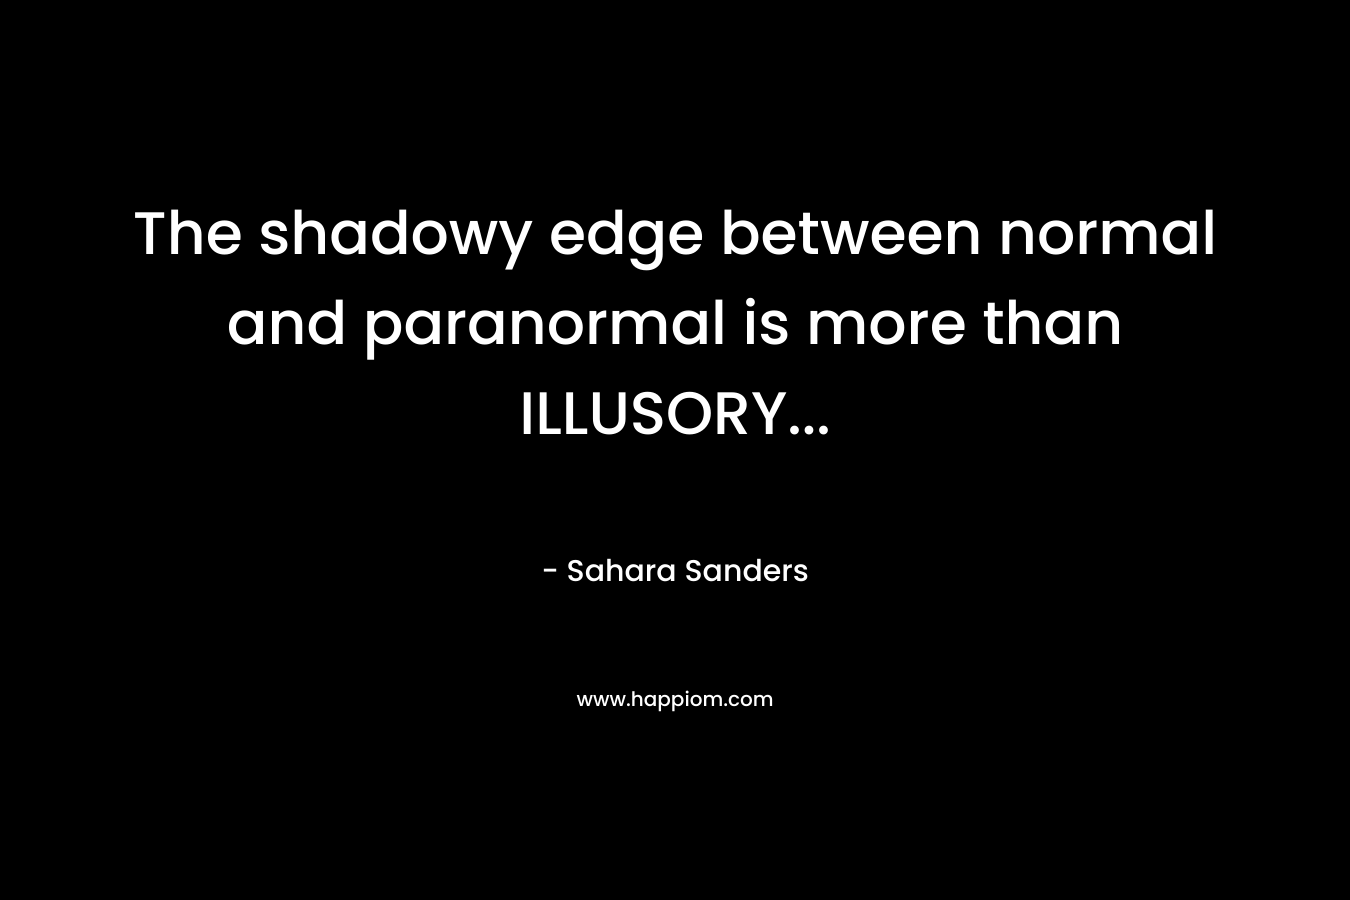 The shadowy edge between normal and paranormal is more than ILLUSORY… – Sahara Sanders